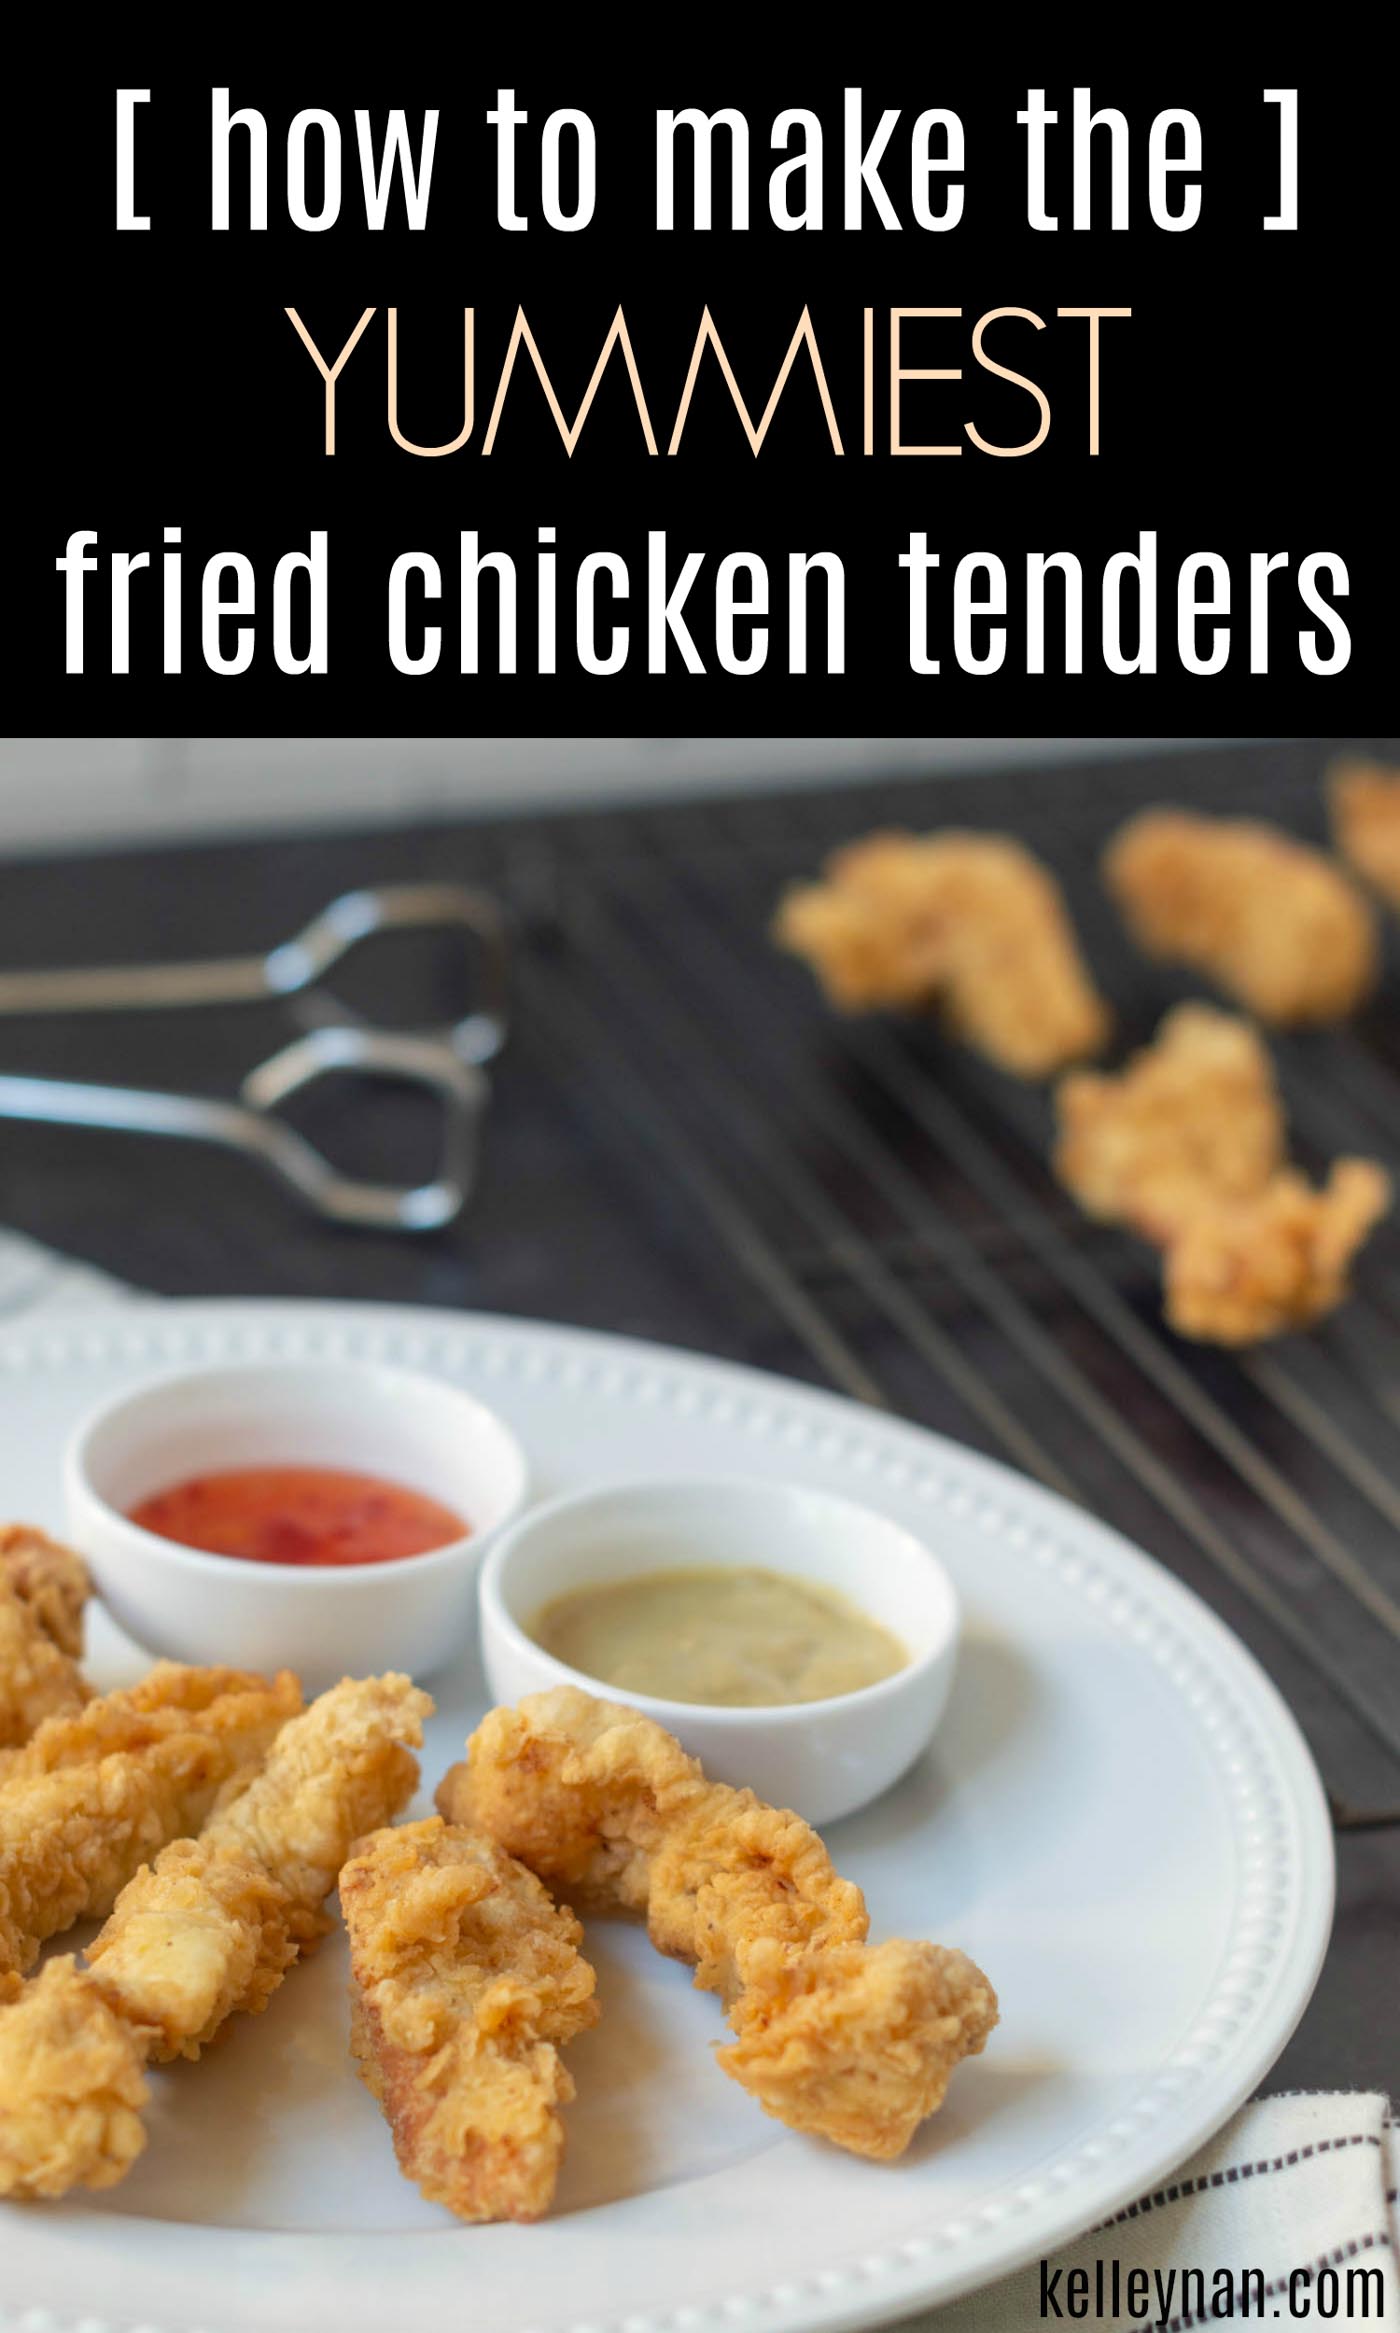 How to Fry the Best Chicken Tenders